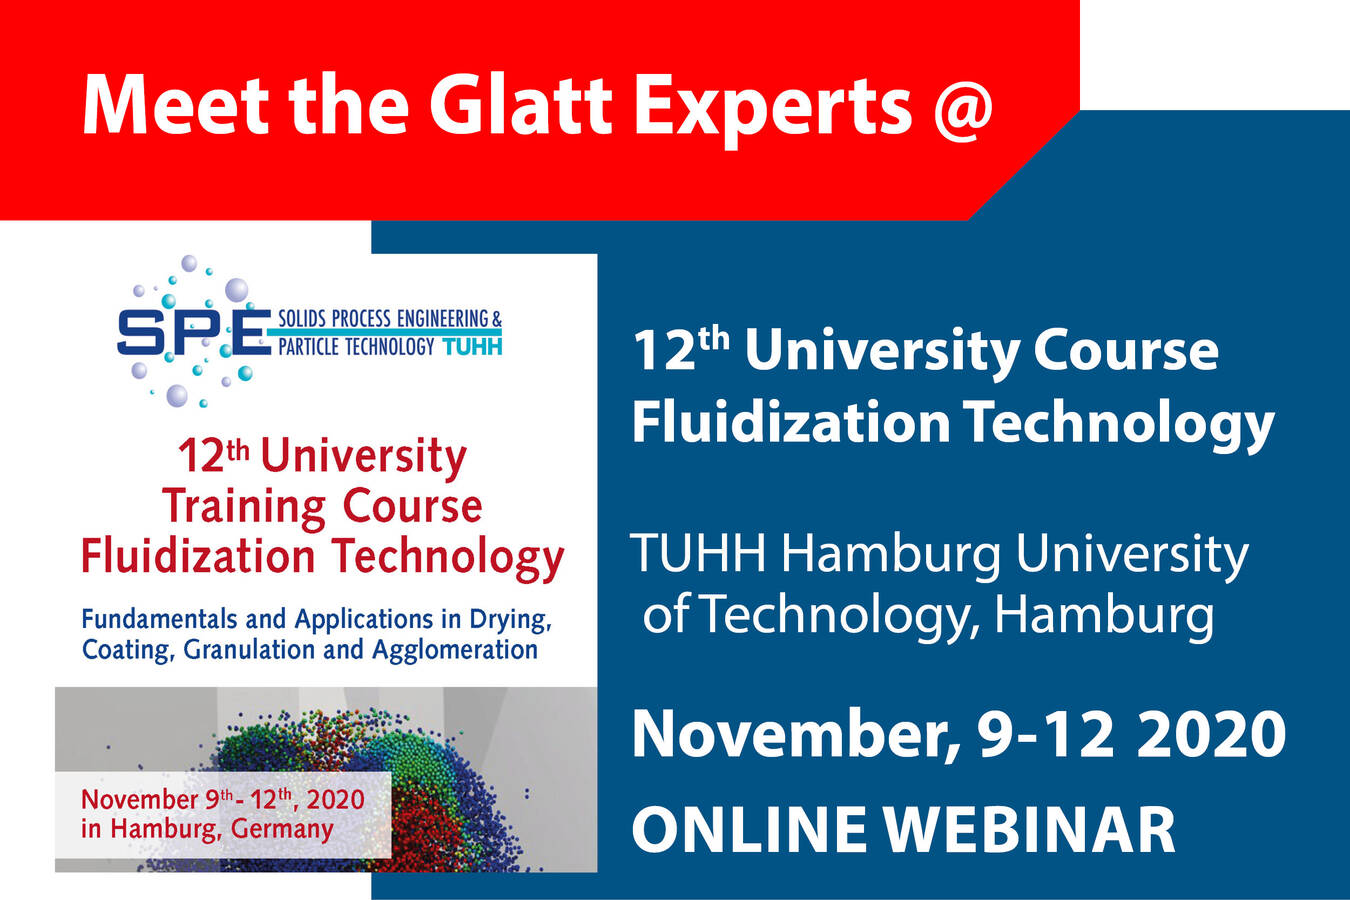 Applications in Drying, Coating, Granulation and Agglomeration Online Webinar on Fundamentals and Applications in Drying, Coating, Granulation and Agglomeration